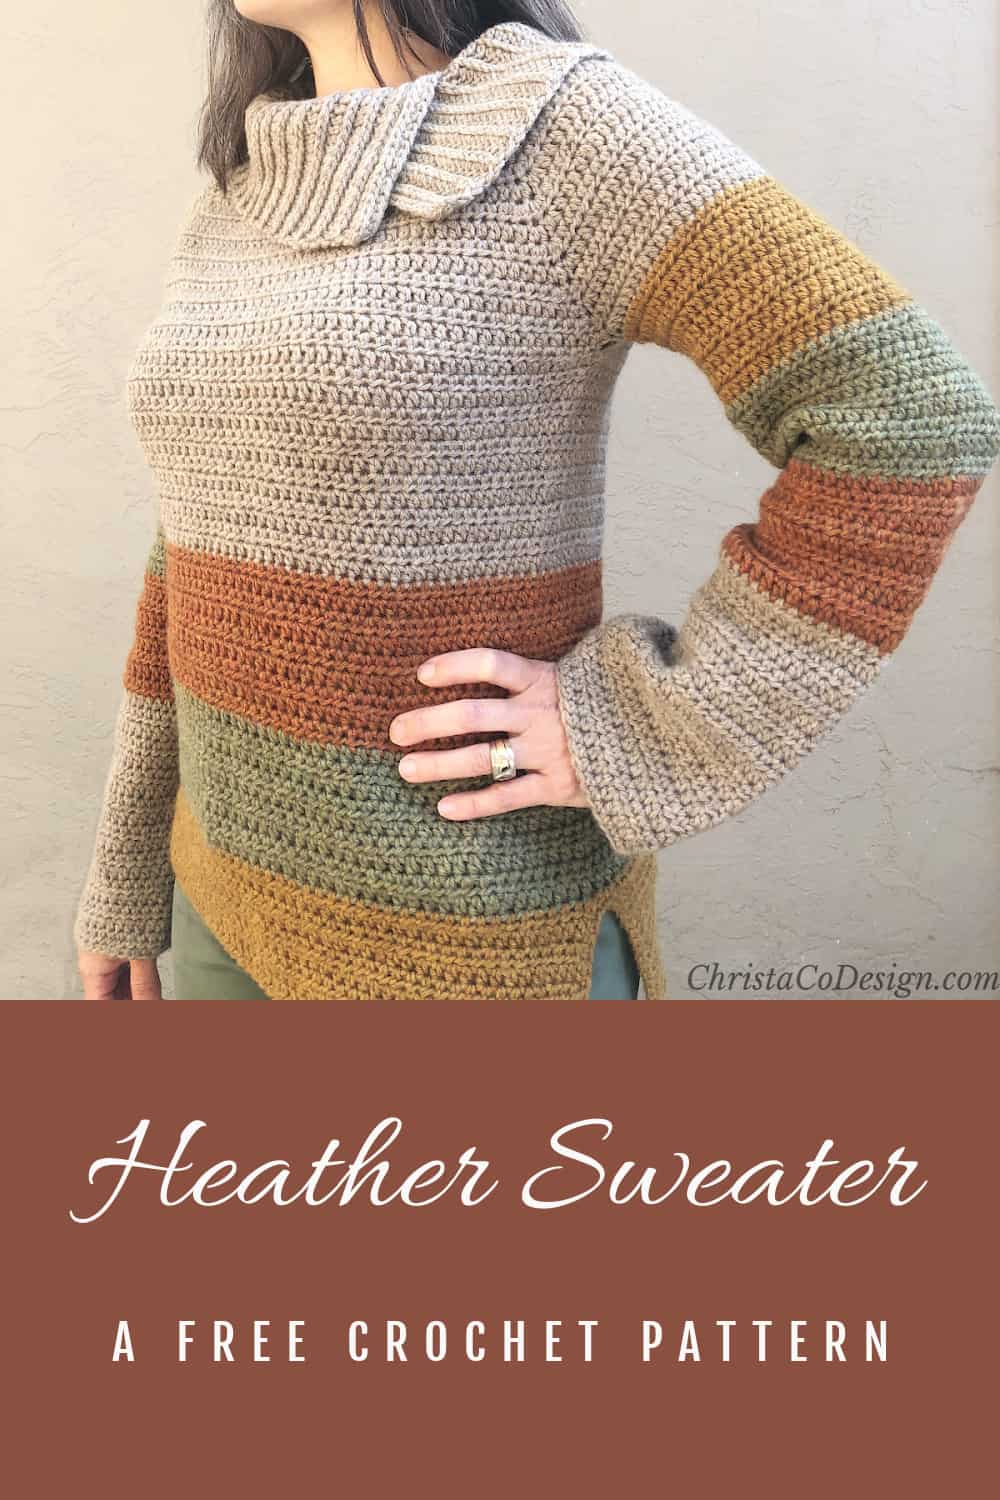 Pin image with text Heather Sweater a free crochet pattern picture of woman in striped sweater with cowl neck.